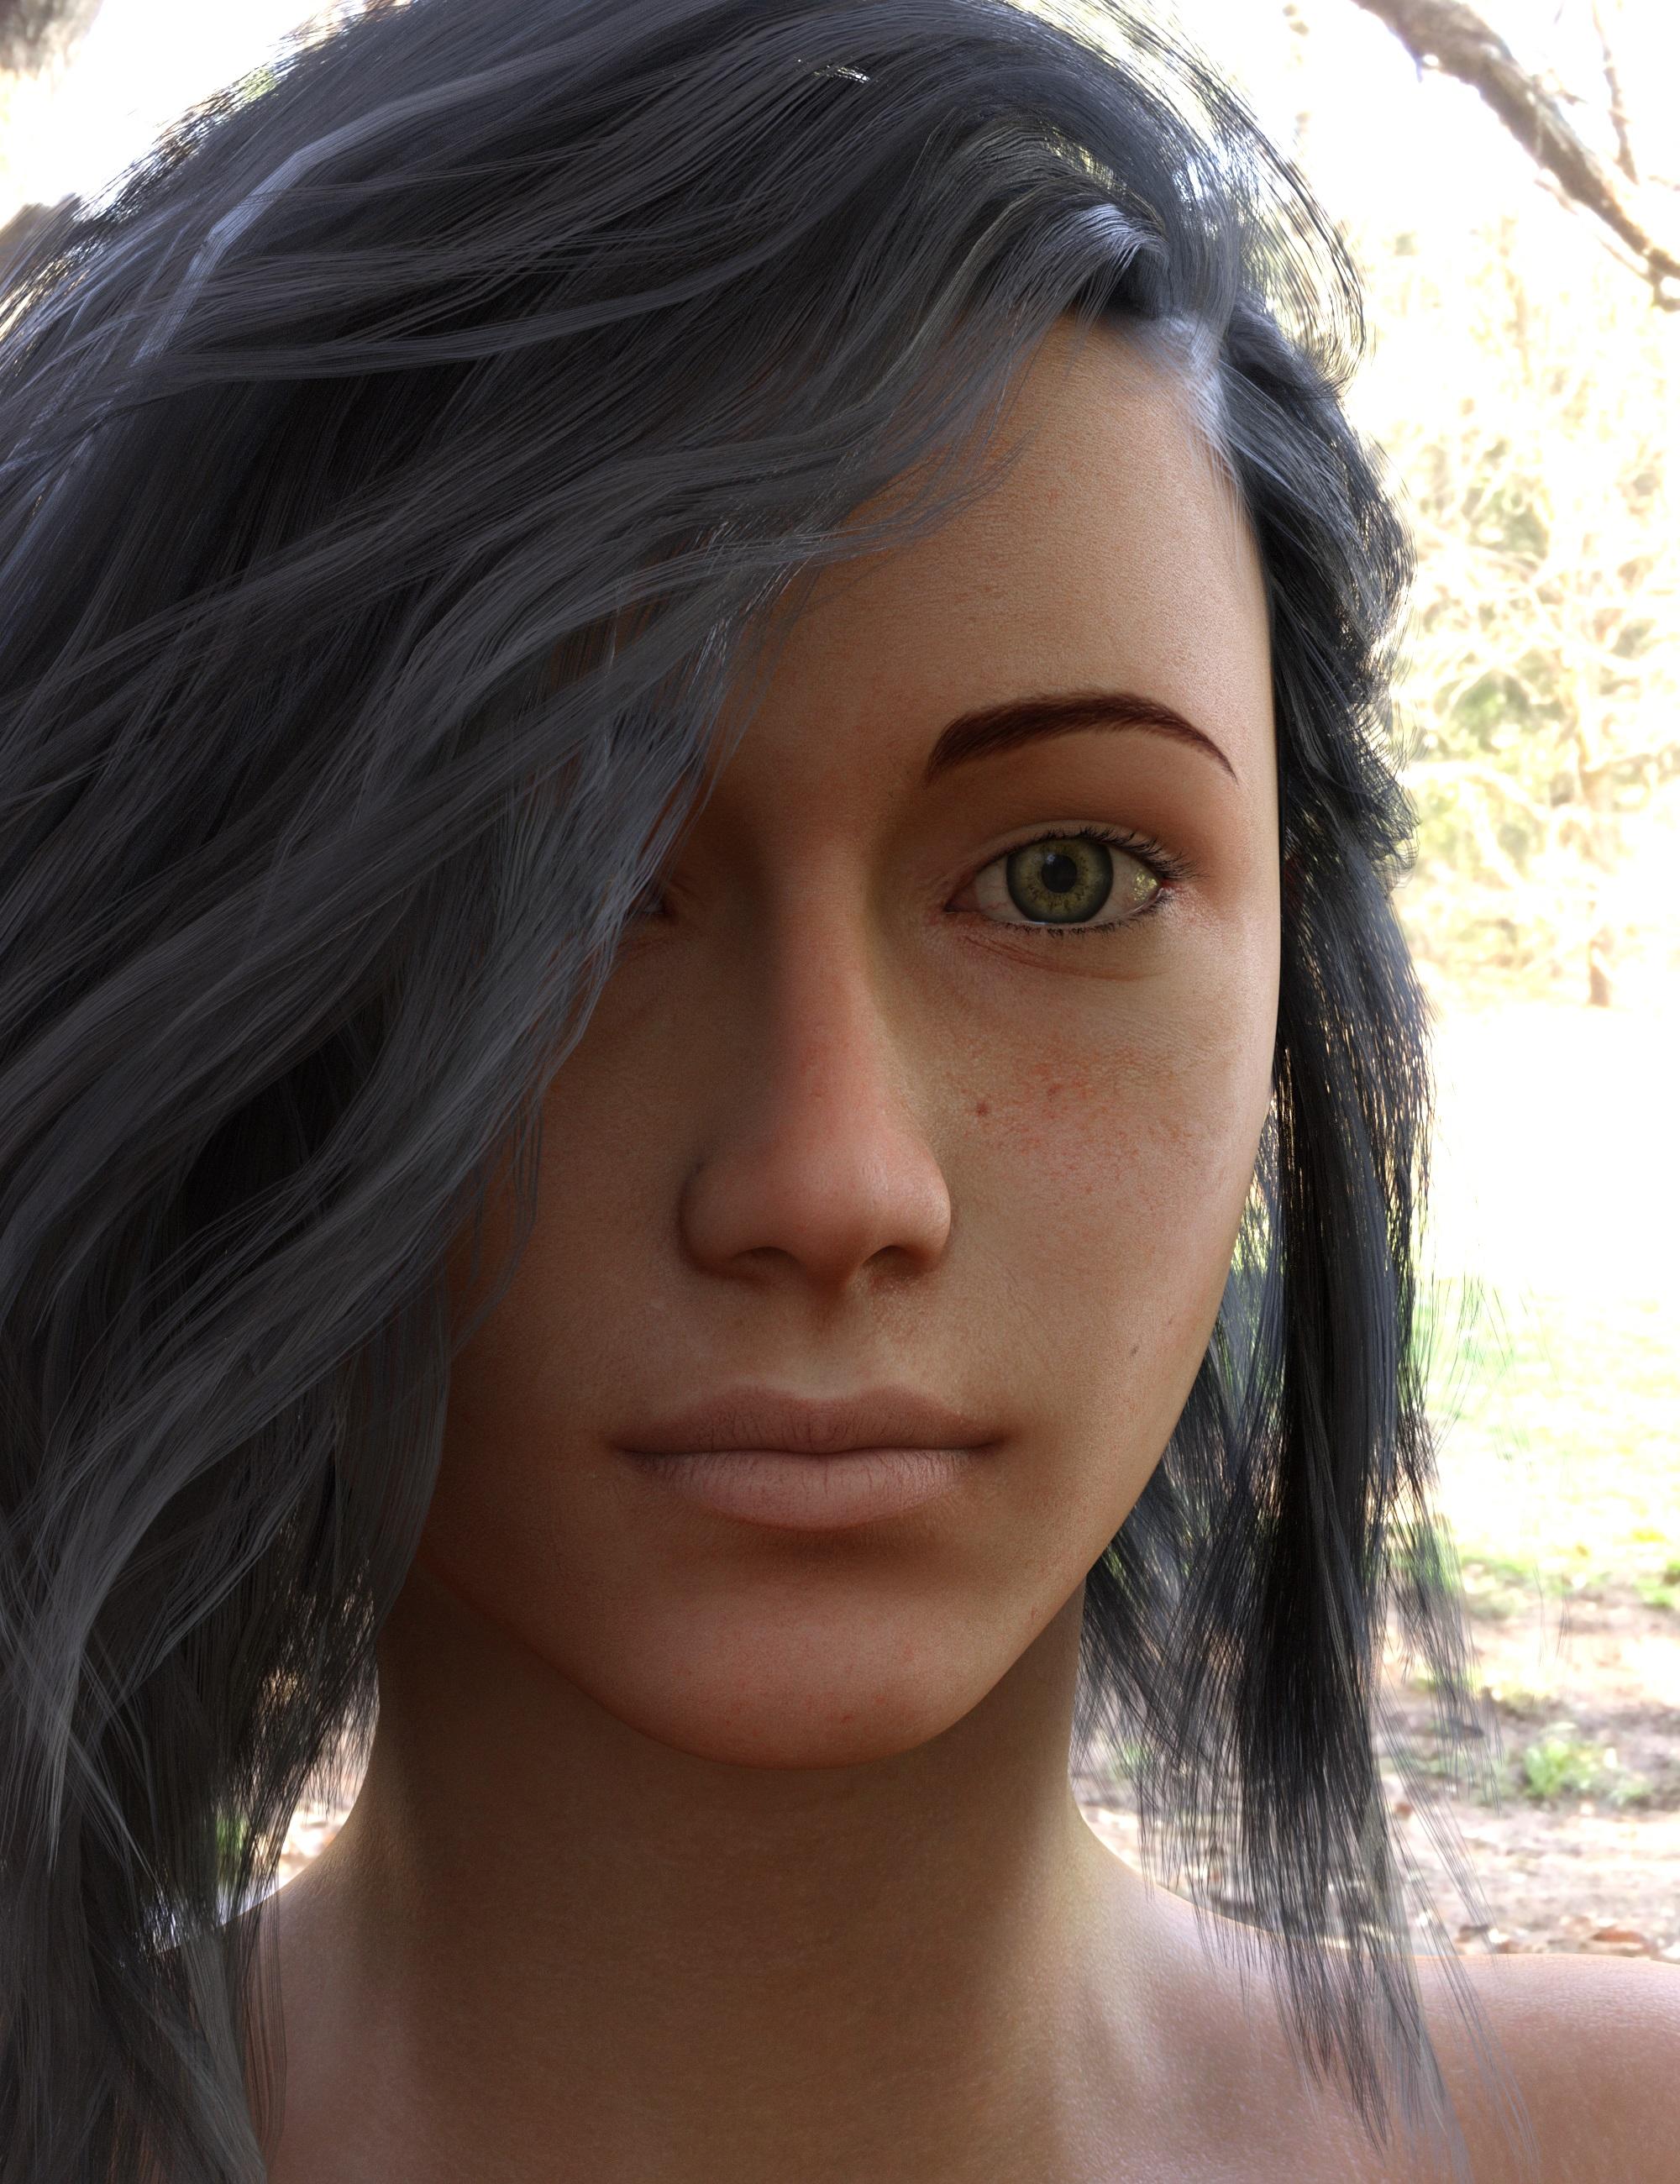 Released Ecvh0 Skin Shader For Genesis 8 Female Commercial Page 3